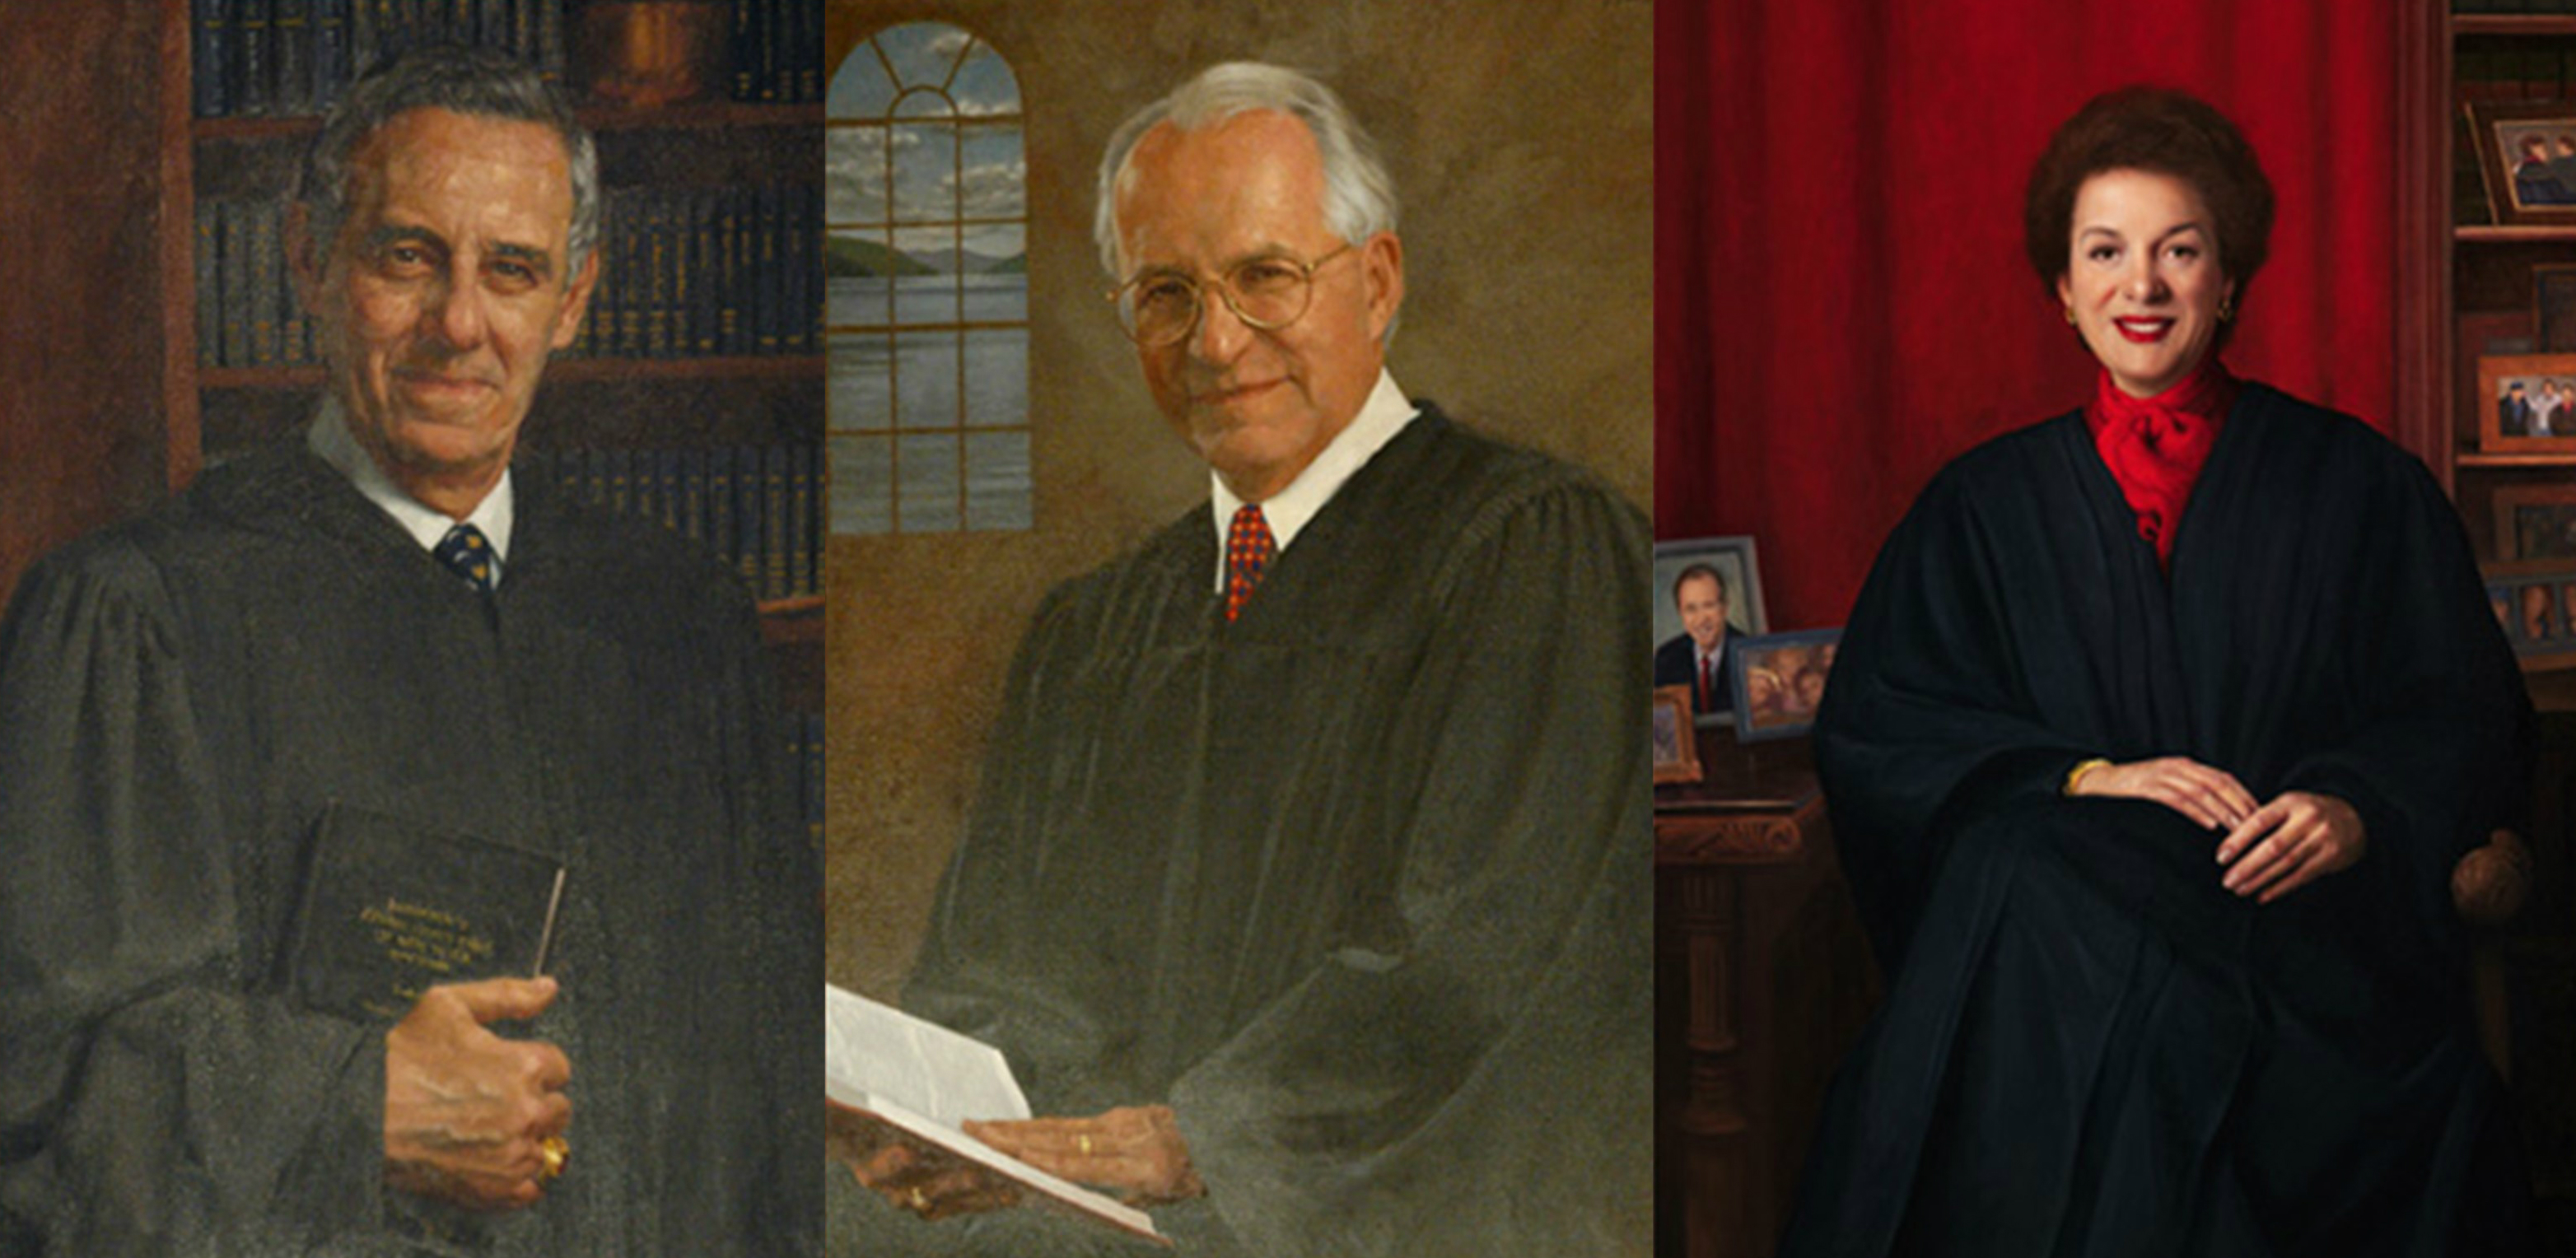 Official Court of Appeals portraits of Hon. Joseph W. Bellacosa, Hon. Richard C. Wesley, and Hon. Judith S. Kaye